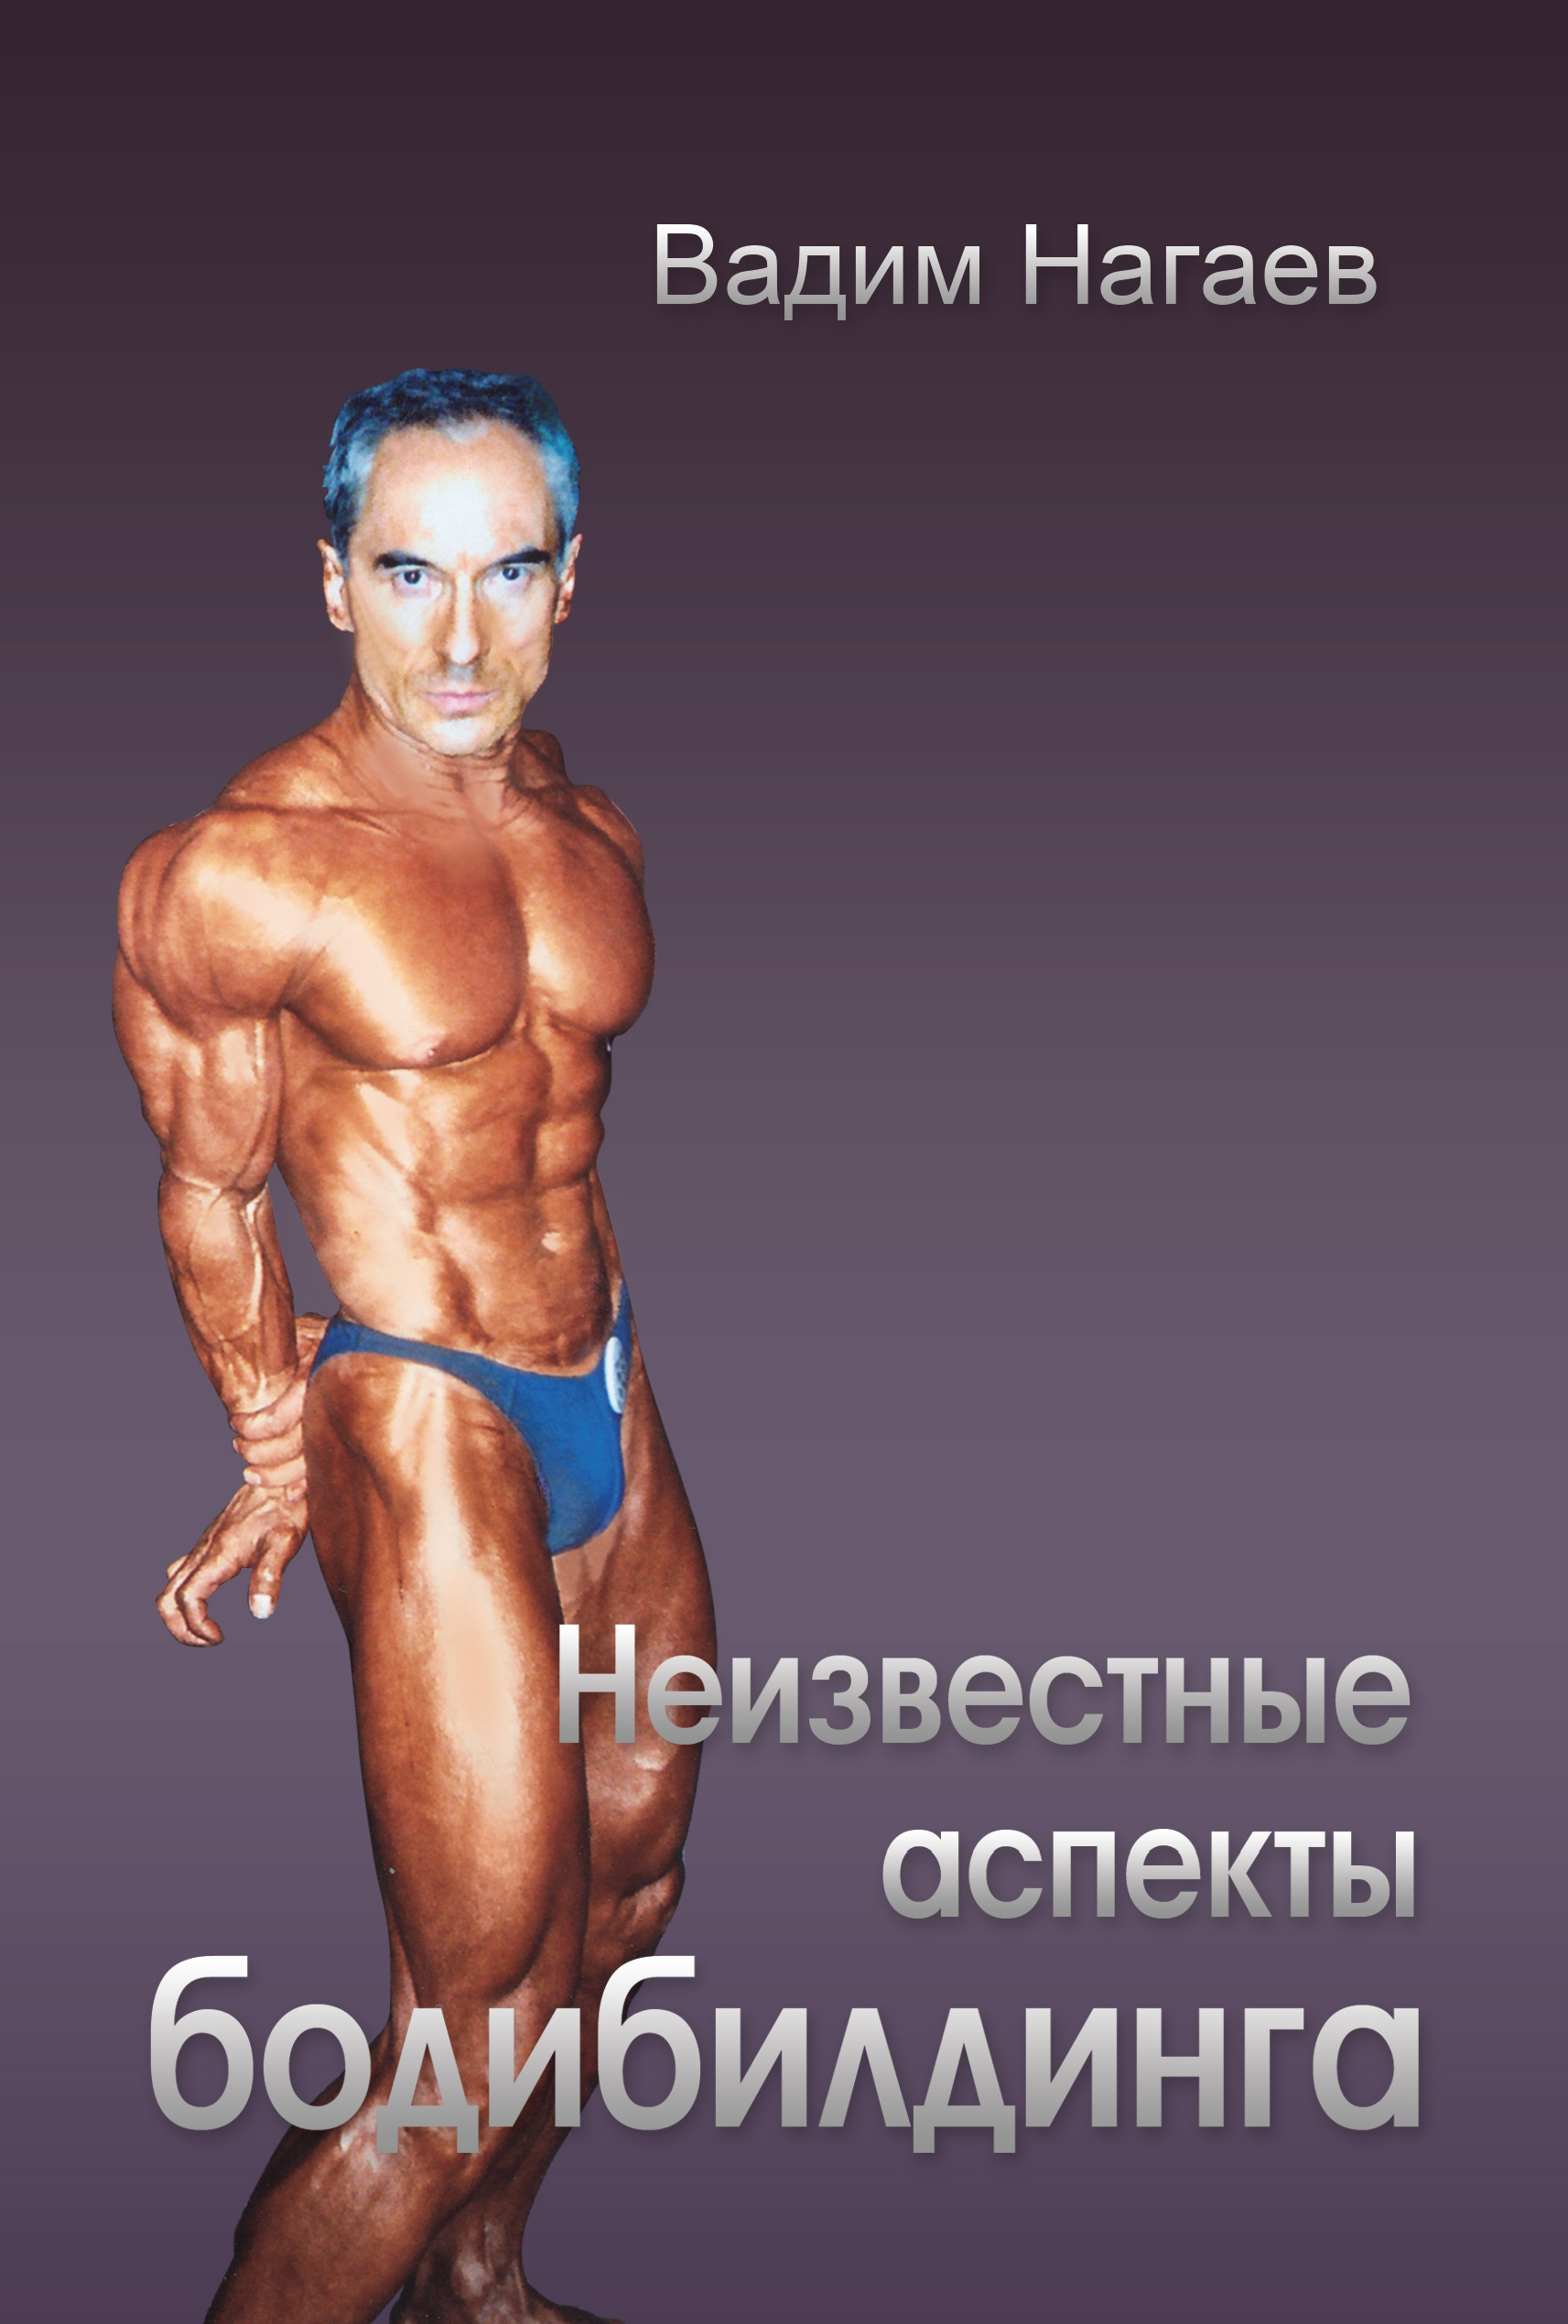 Everything You Wanted to Know About спорт бодибилдинг and Were Too Embarrassed to Ask